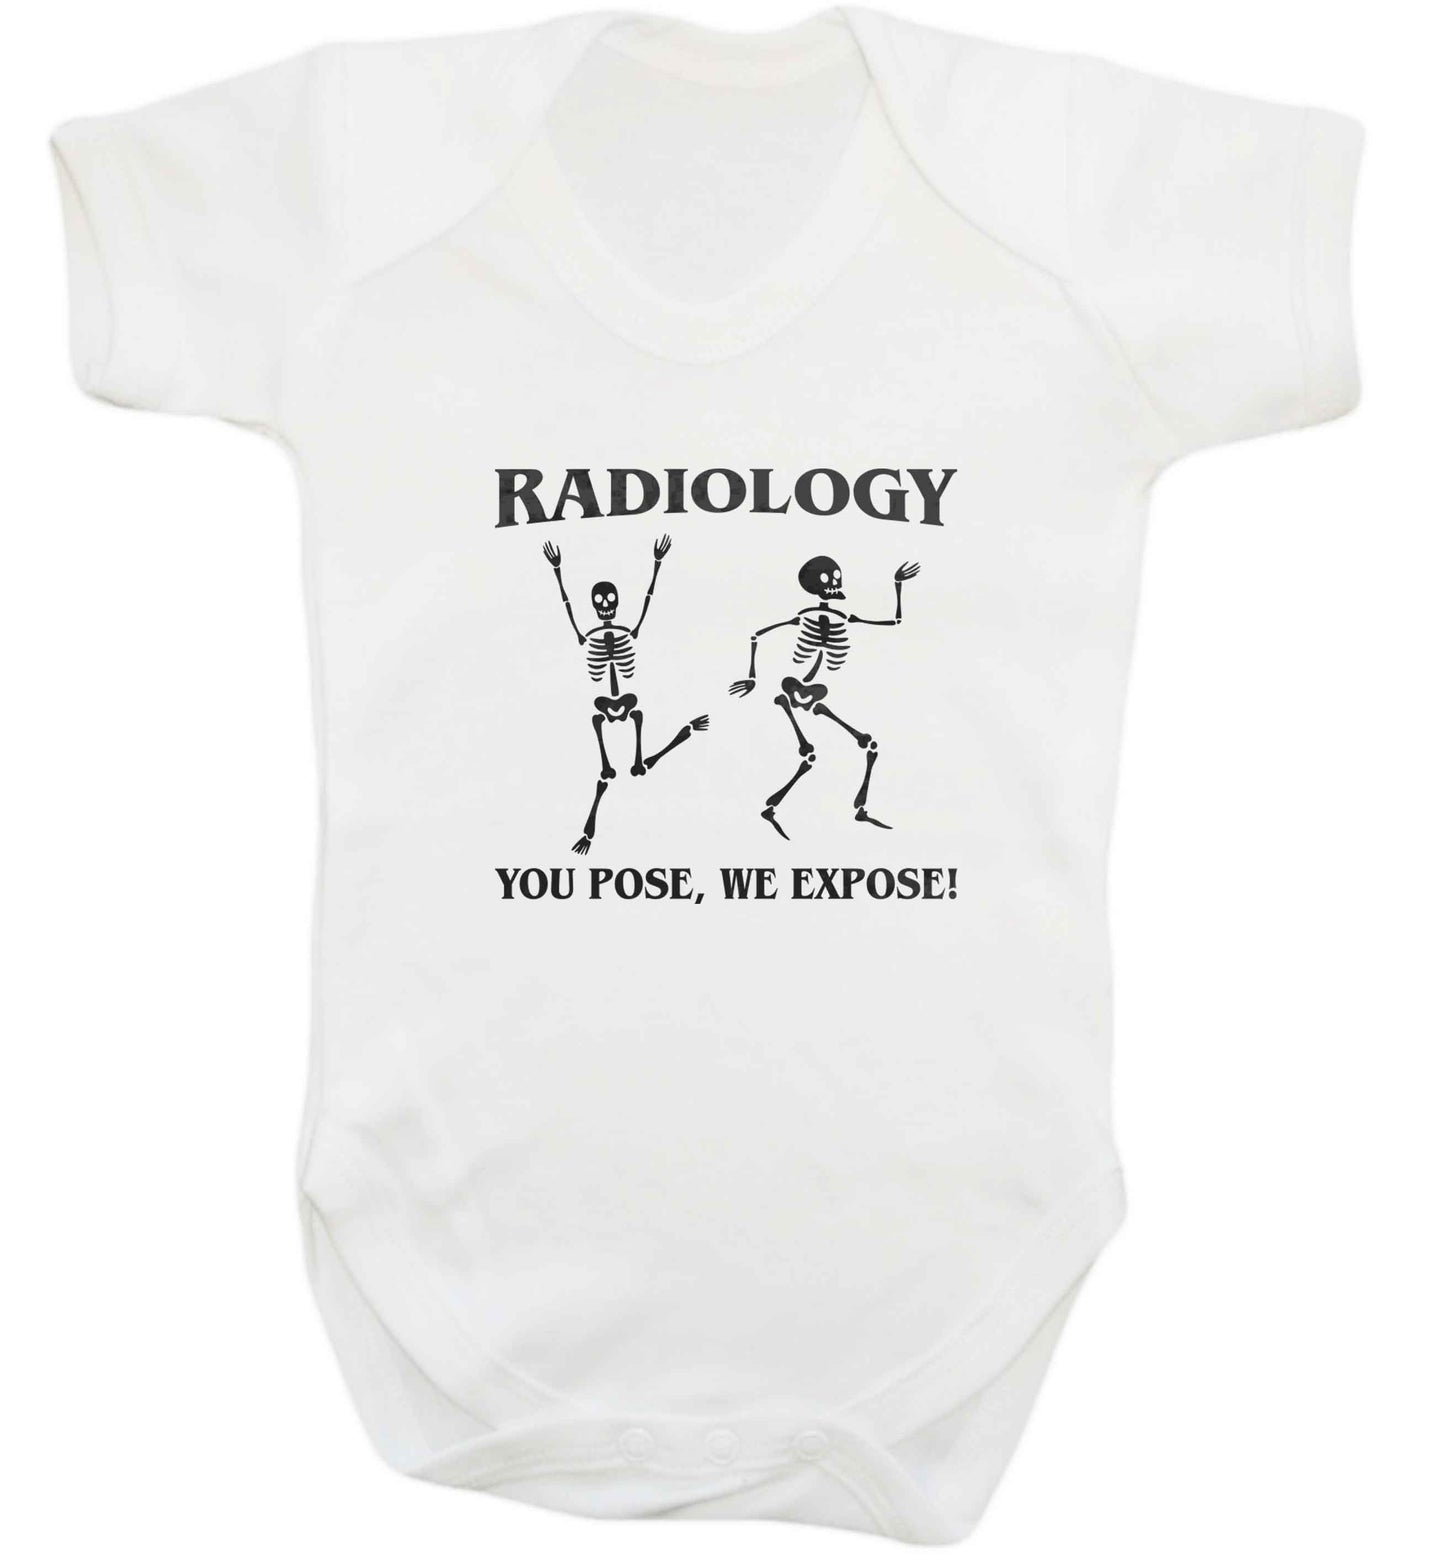 Radiology you pose we expose baby vest white 18-24 months